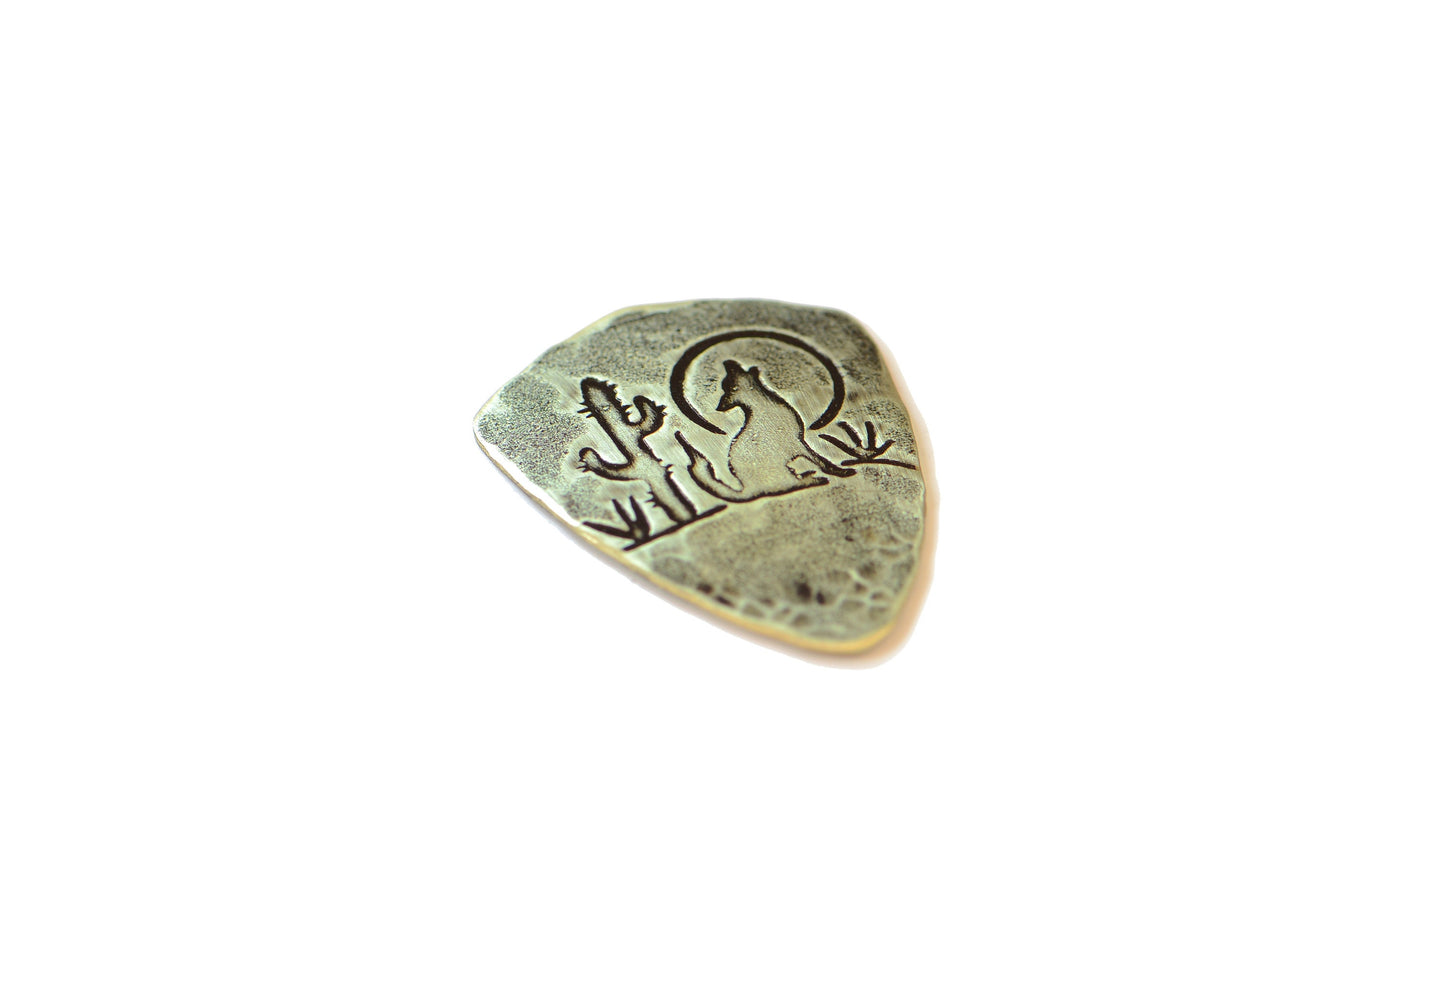 Shield style brass guitar pick with coyote moon and Saguaro cactus